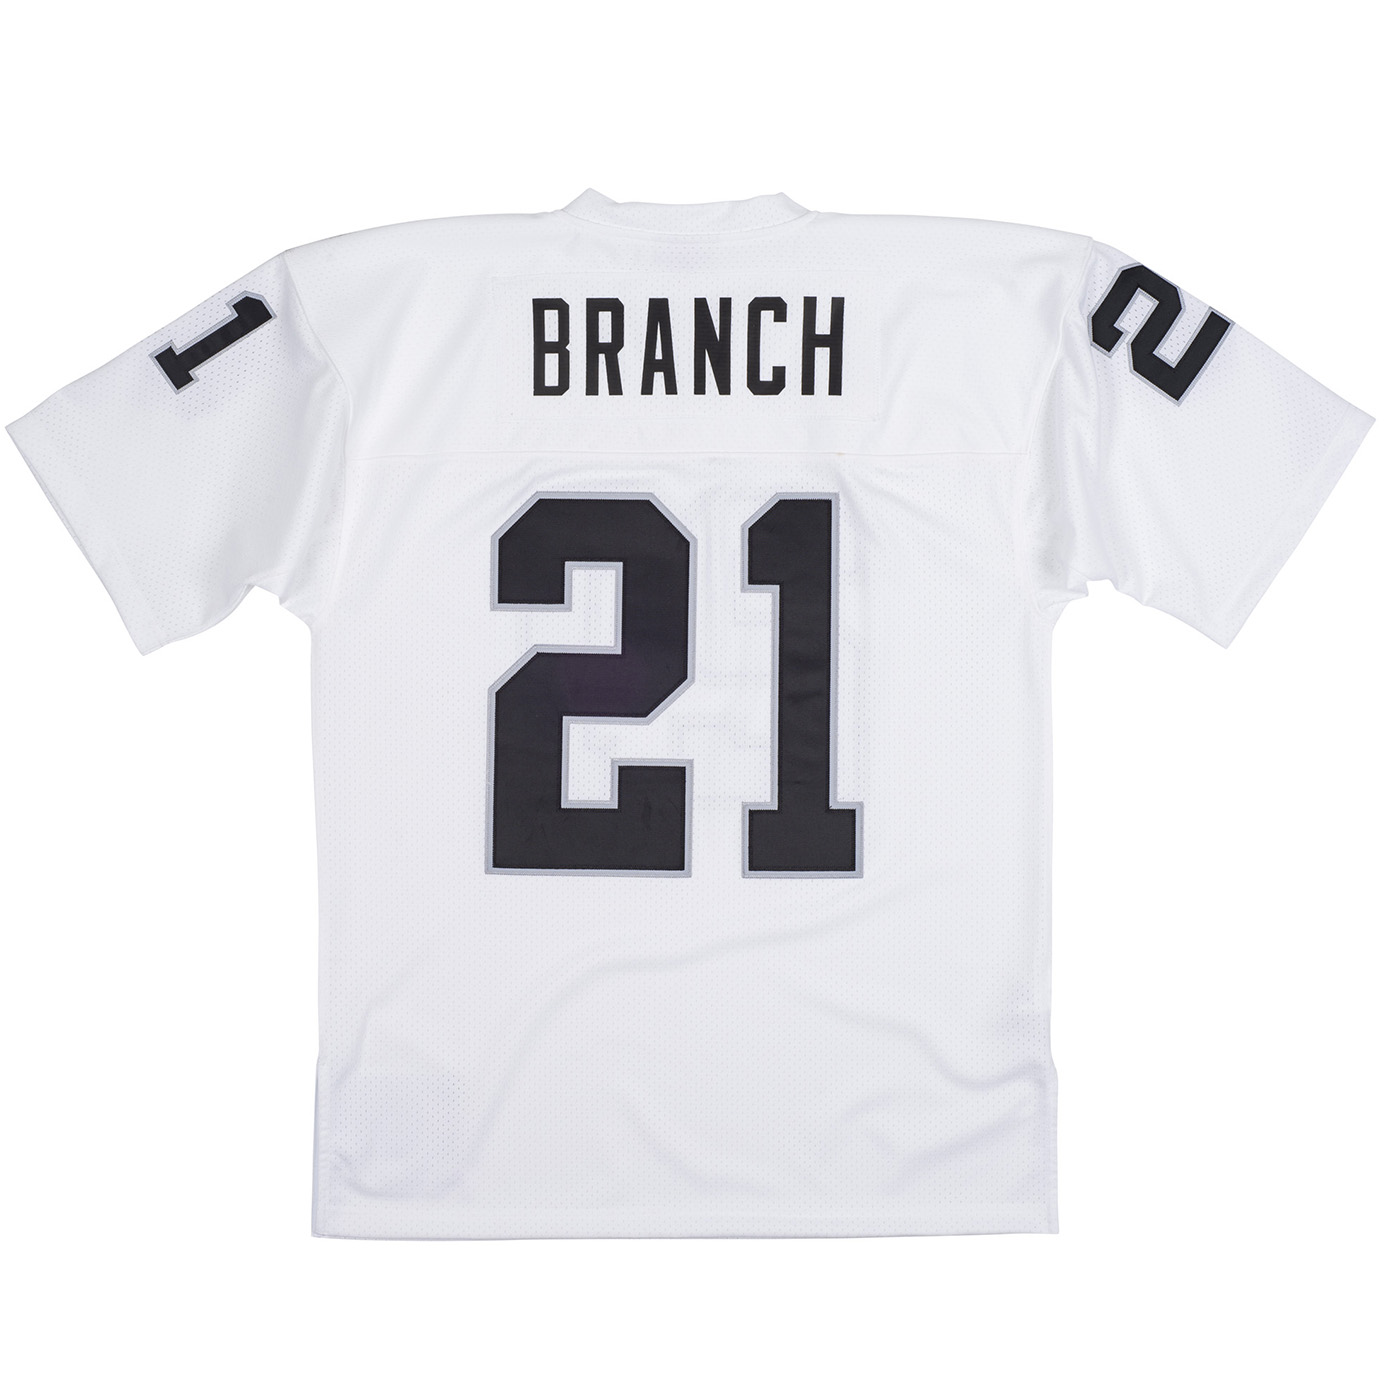 New NFL Authentic Throwback Jerseys are HERE! - Mitchell And Ness